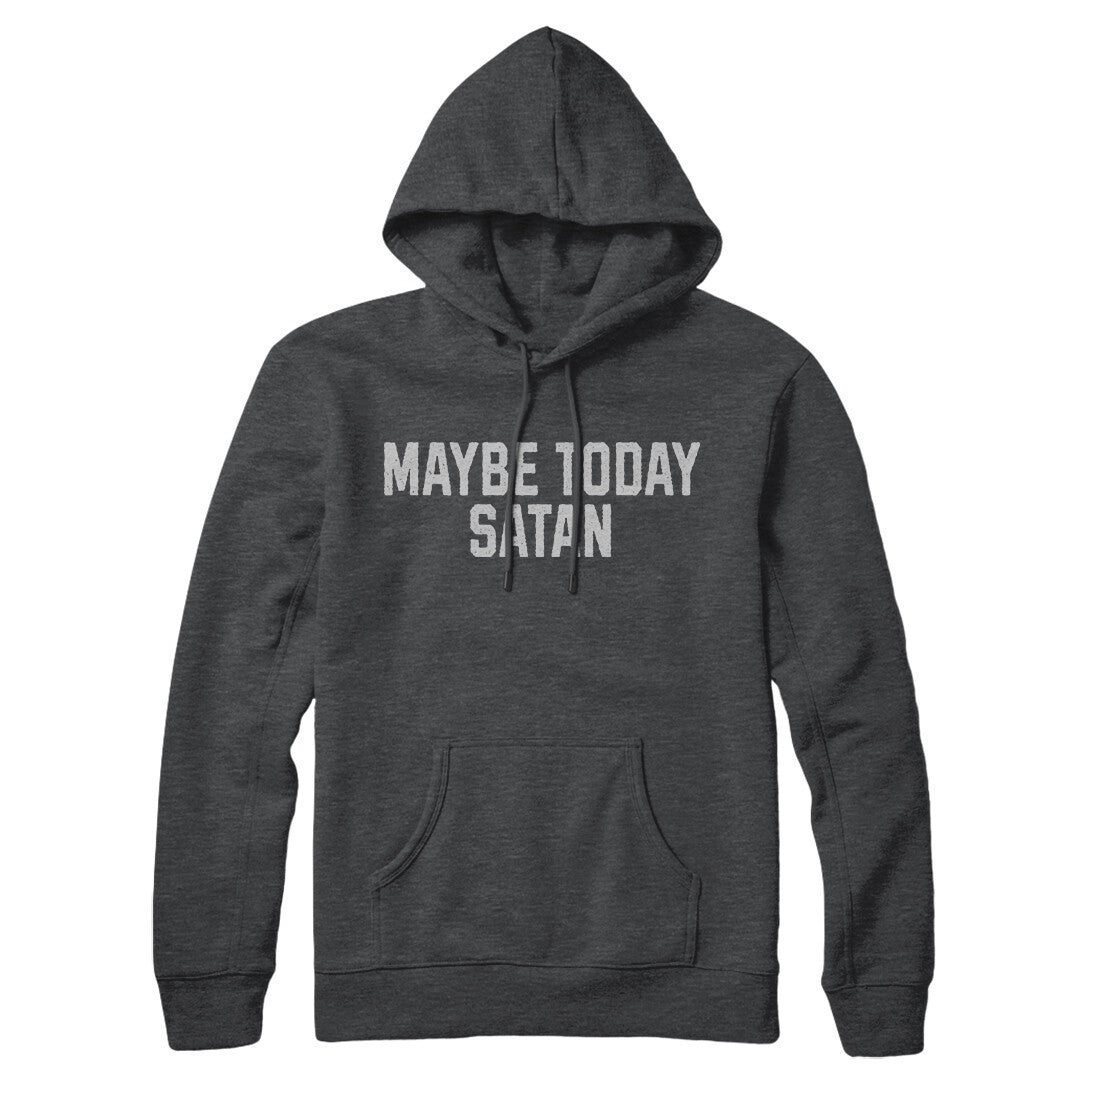 Maybe Today Satan in Charcoal Heather Color